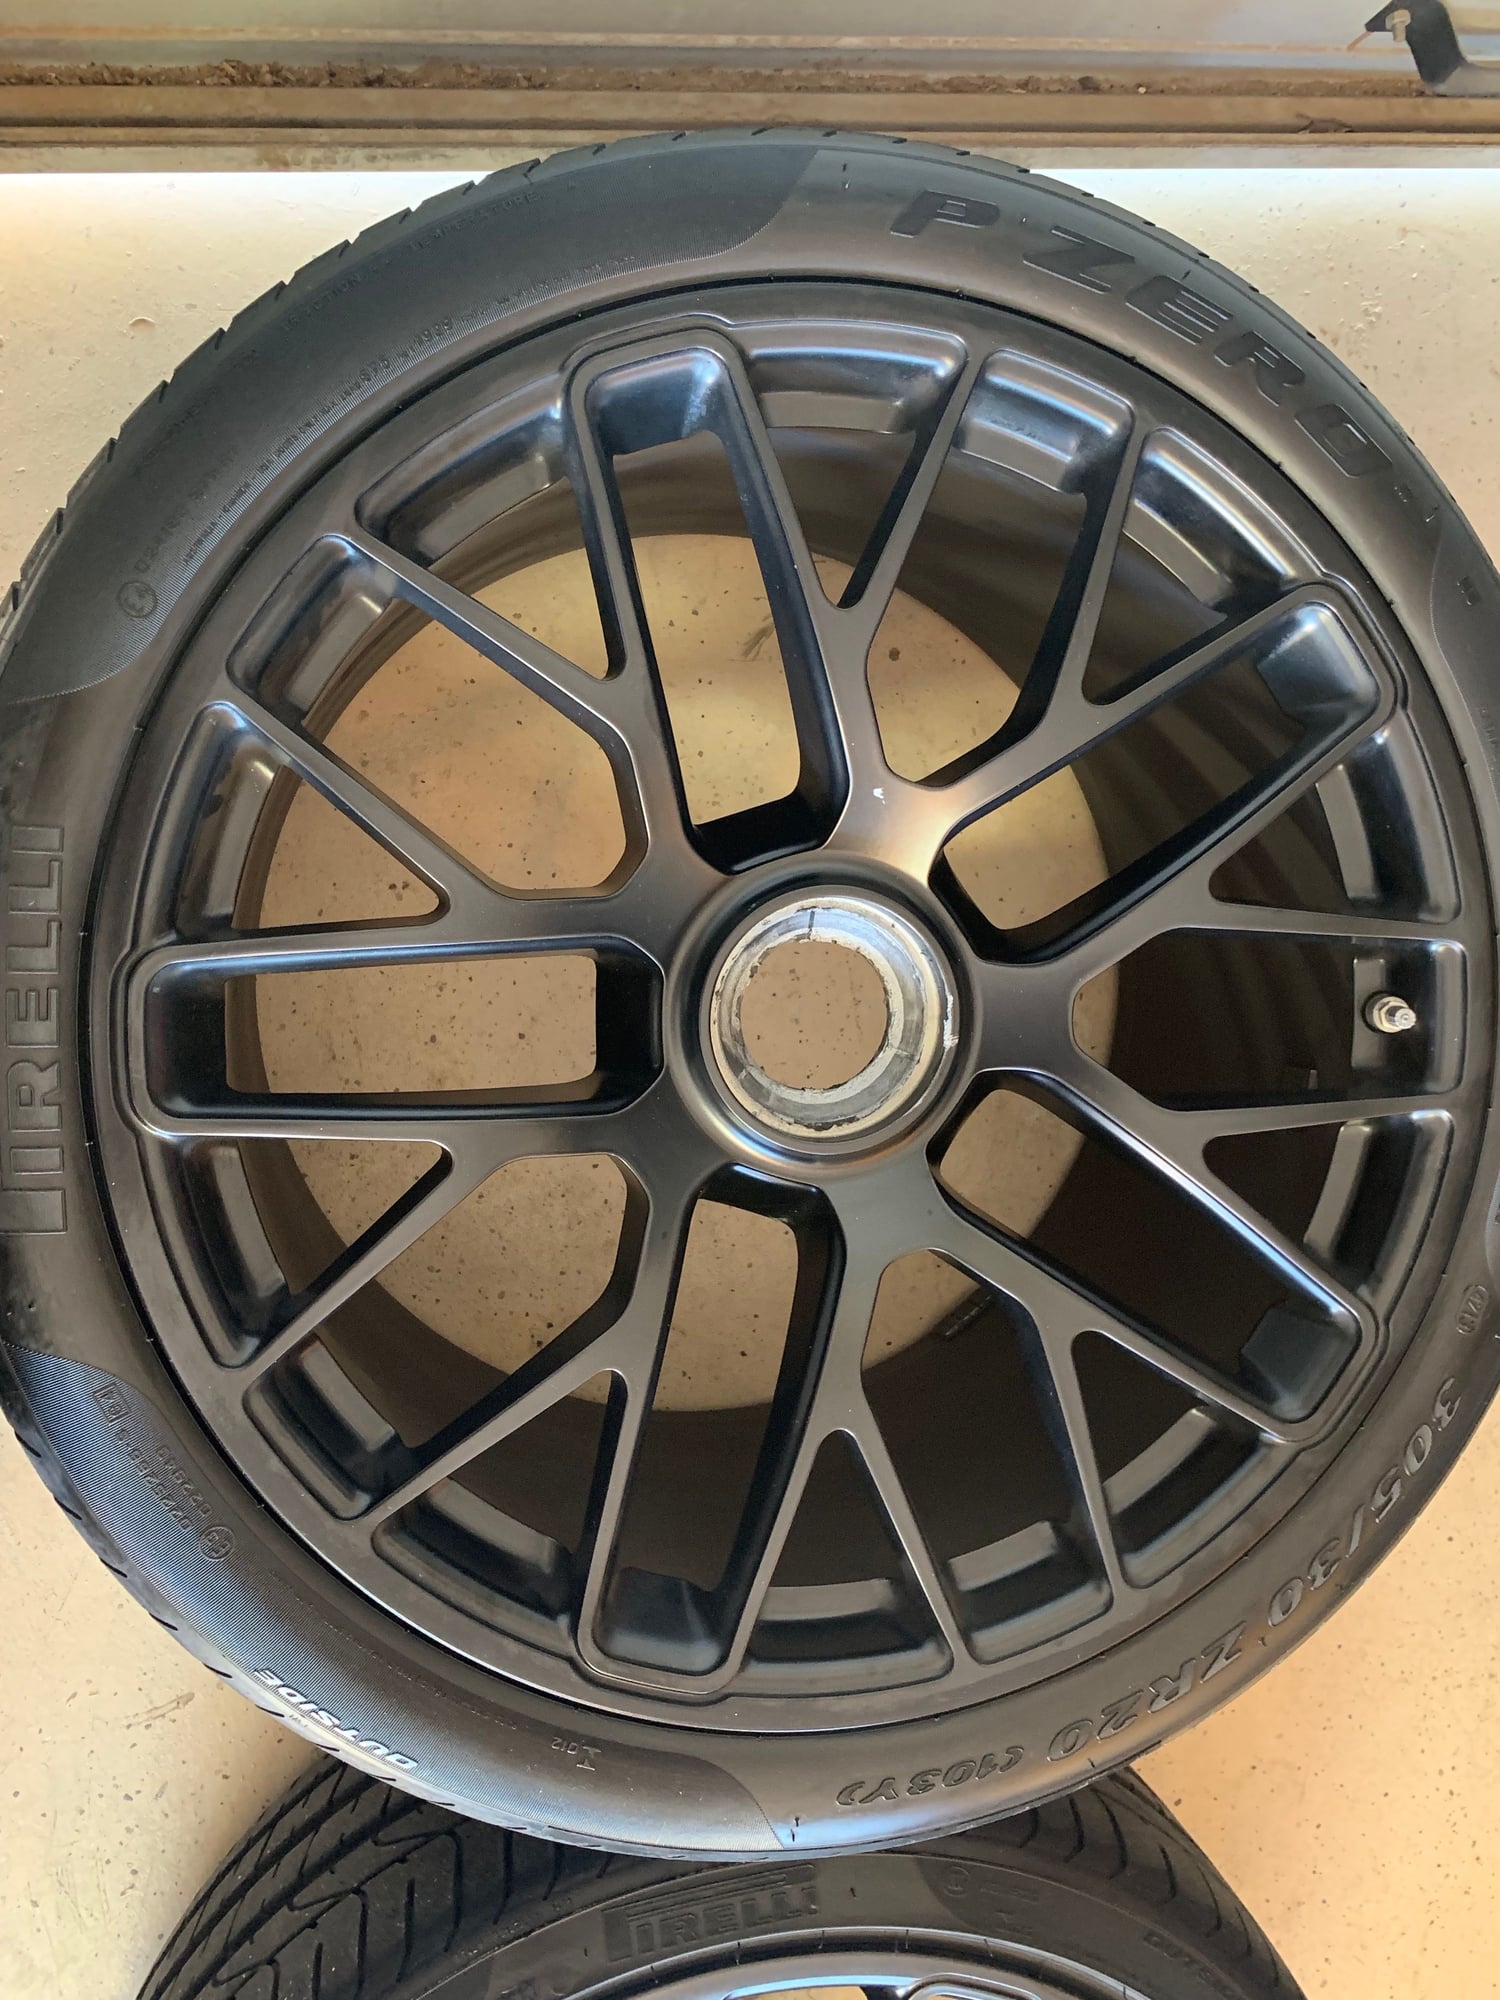 Wheels and Tires/Axles - 991 Turbo S Wheels finished in matte black w/ Tires - Used - 2014 to 2018 Porsche 911 - Scottsdale, AZ 85260, United States